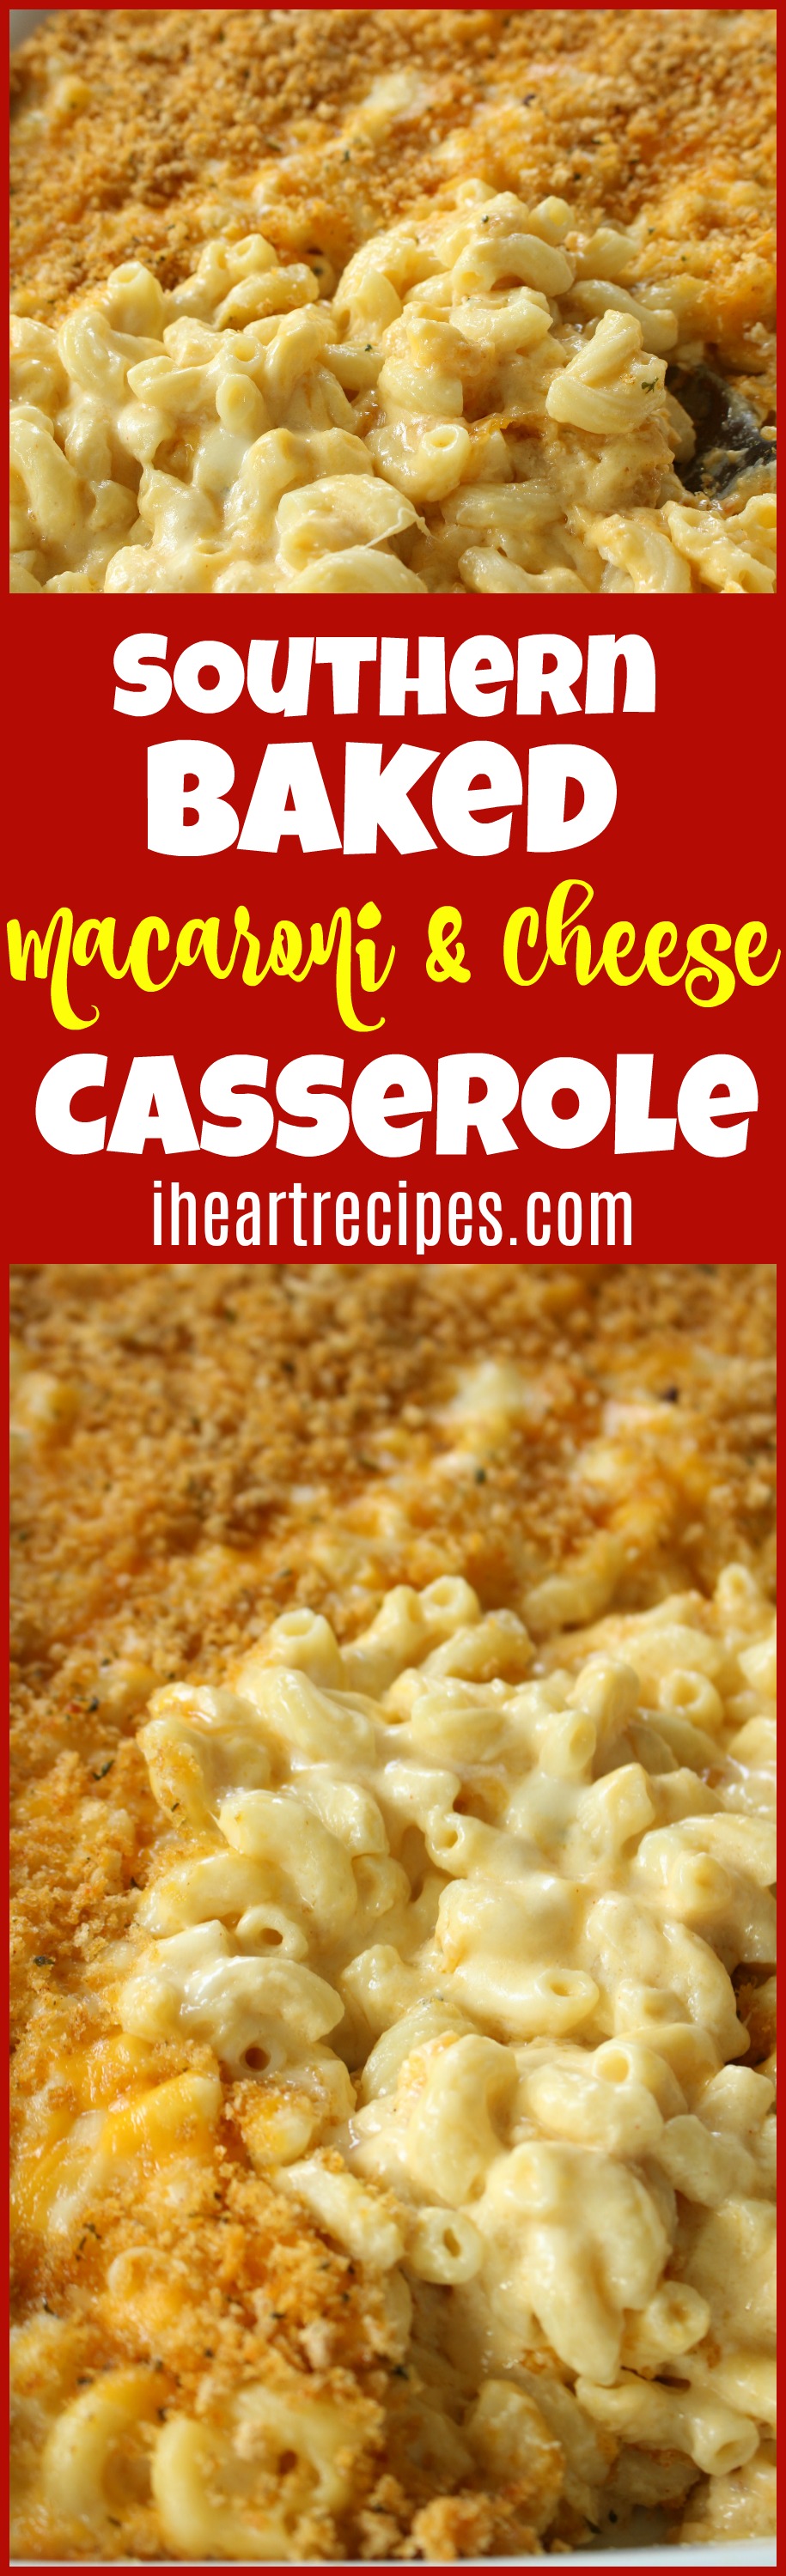 A large Pinterest image featuring pictures of Southern mac and cheese casserole. The image features a block of white and yellow text on a red background that reads, “Southern Baked Macaroni and Cheese Casserole from I Heart Recipes”